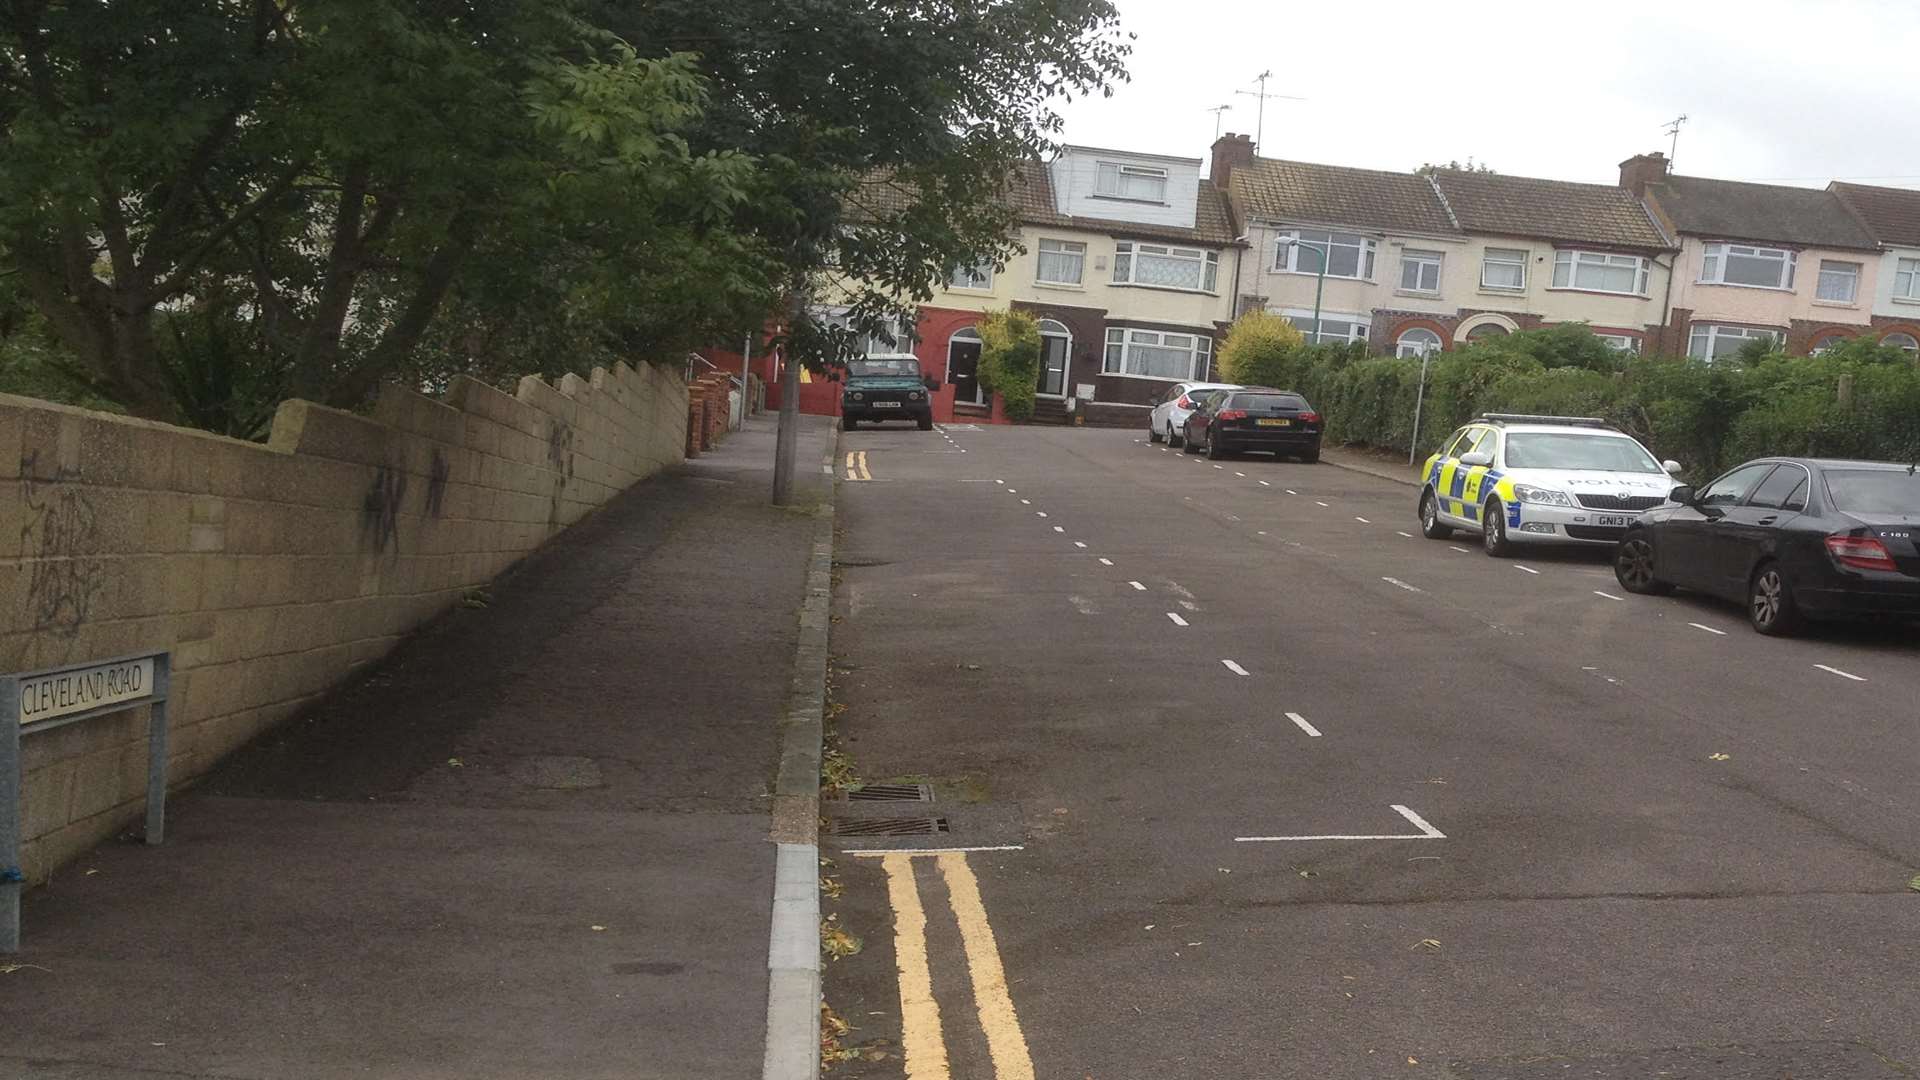 Cleveland Road, near the scene of the stabbing